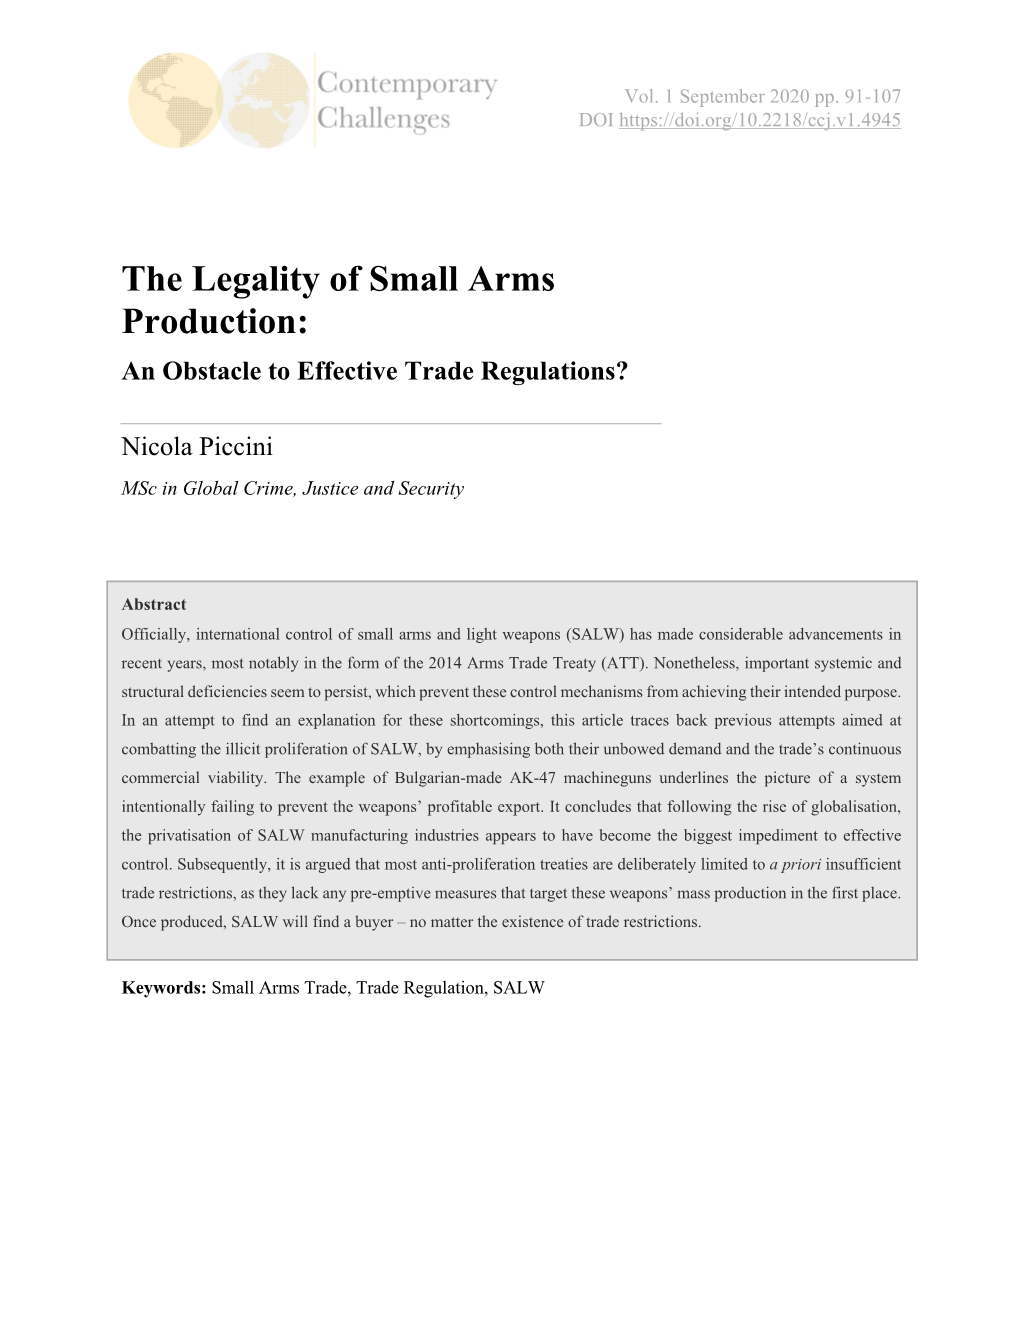 The Legality of Small Arms Production: an Obstacle to Effective Trade Regulations?